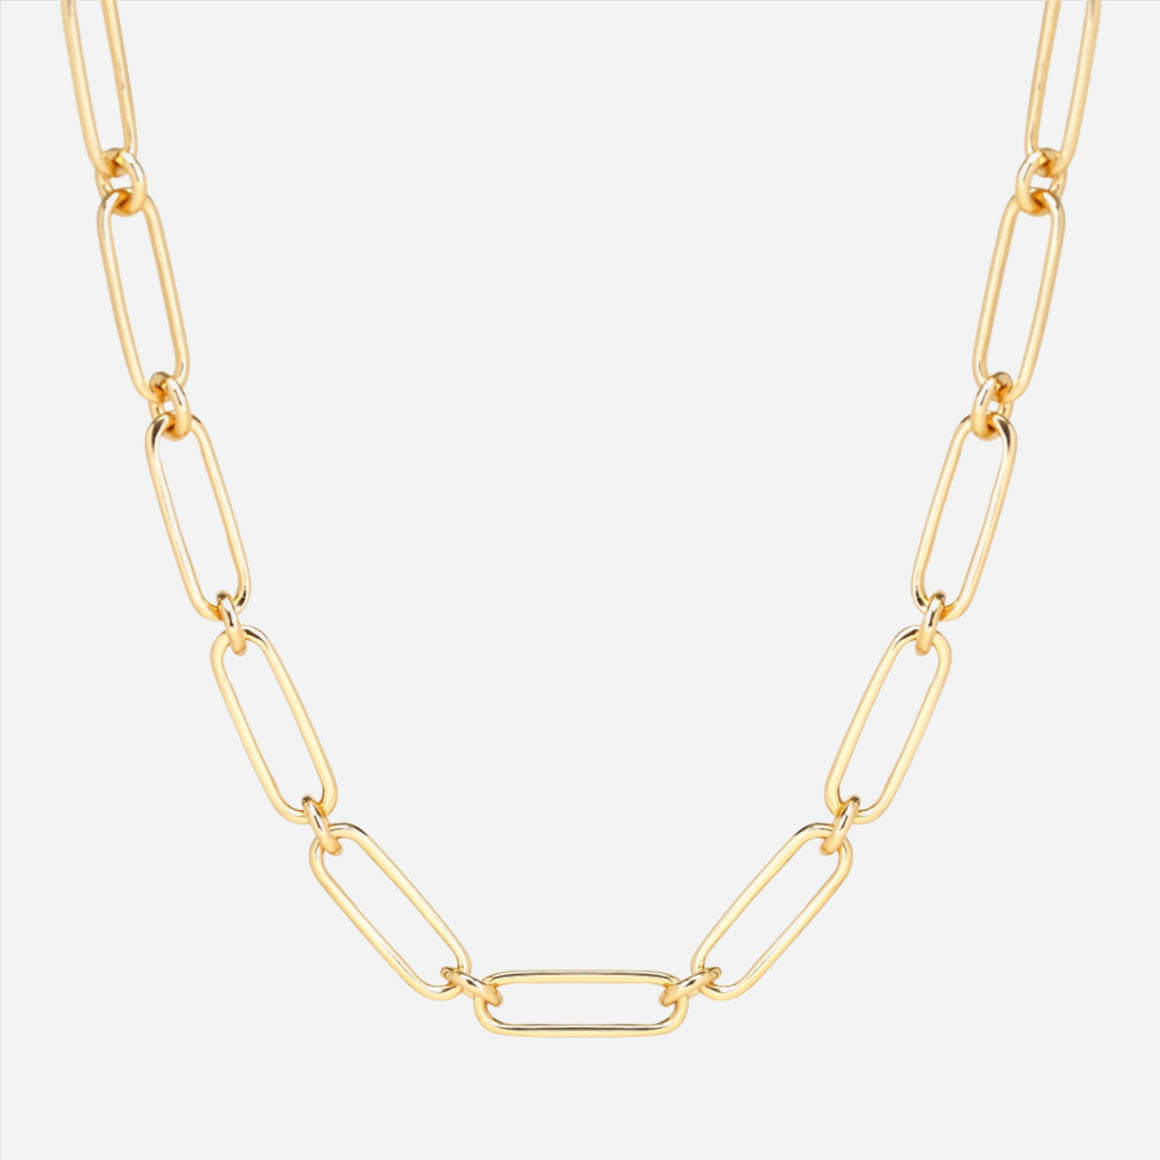 bold link chain necklace